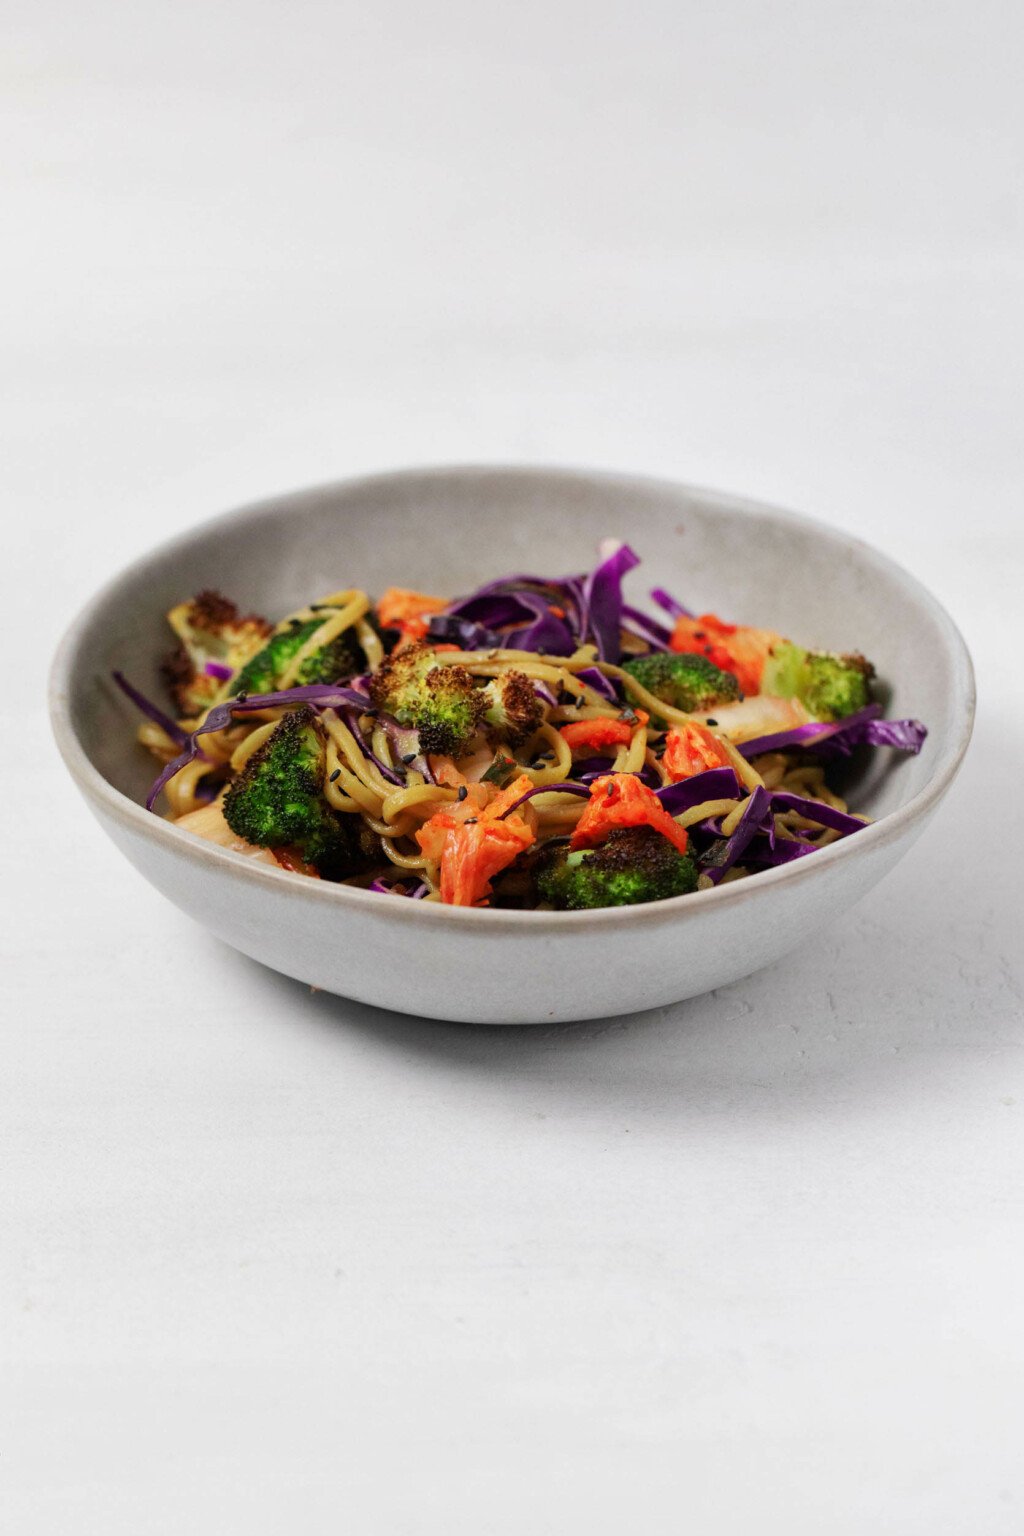 A gray ceramic bowl holds a plant based soba and vegetable dish, which is resting on a bright white surface.